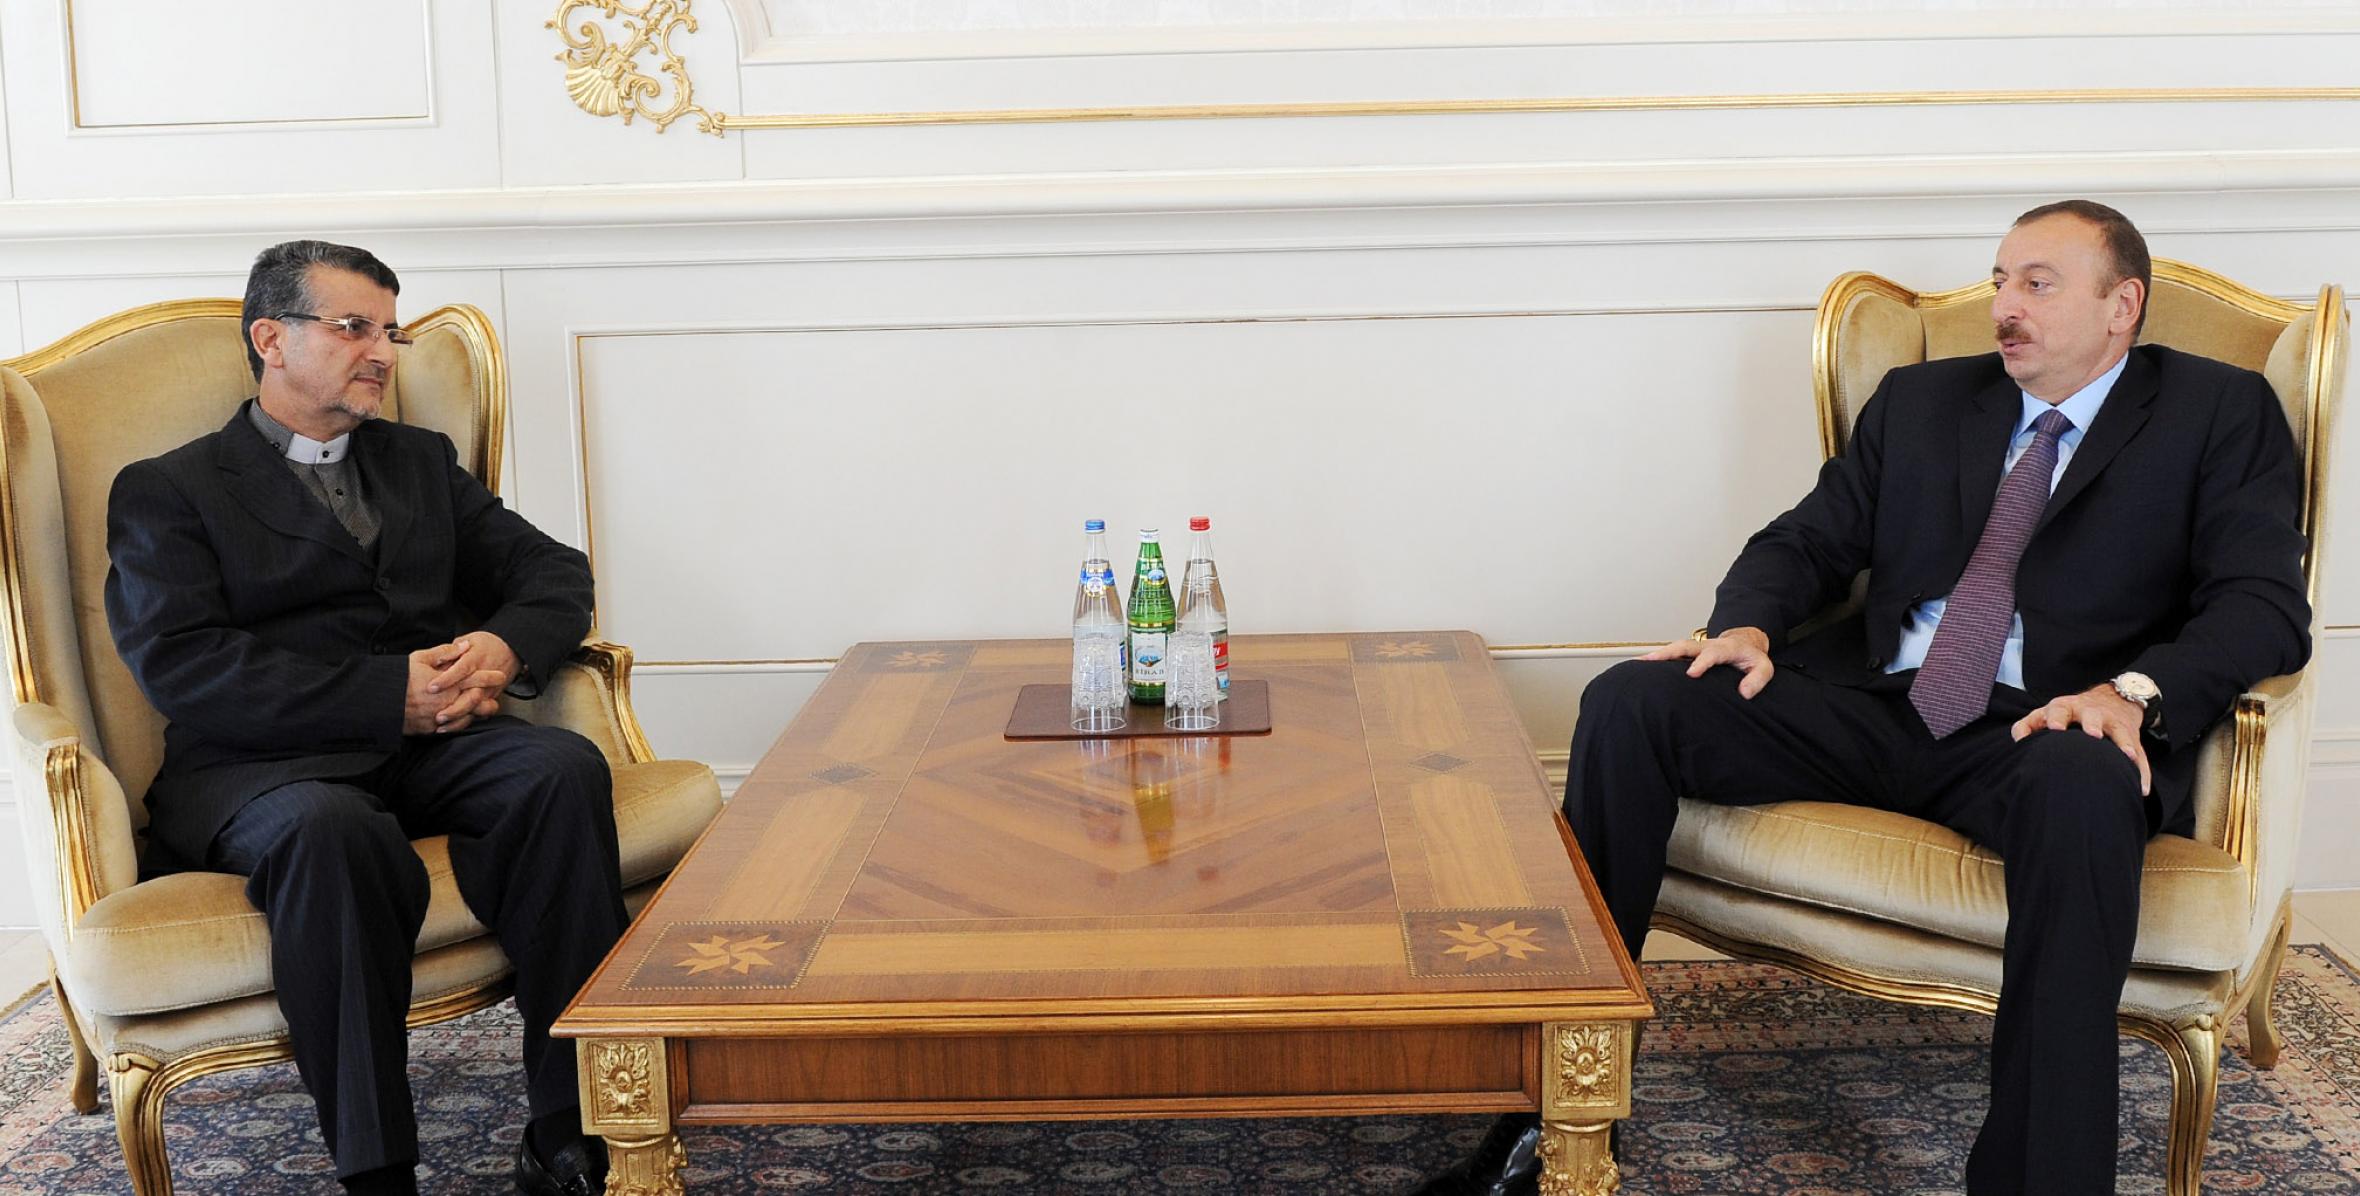 Ilham Aliyev received the outgoing Iranian Ambassador at the end of his diplomatic mission in Azerbaijan